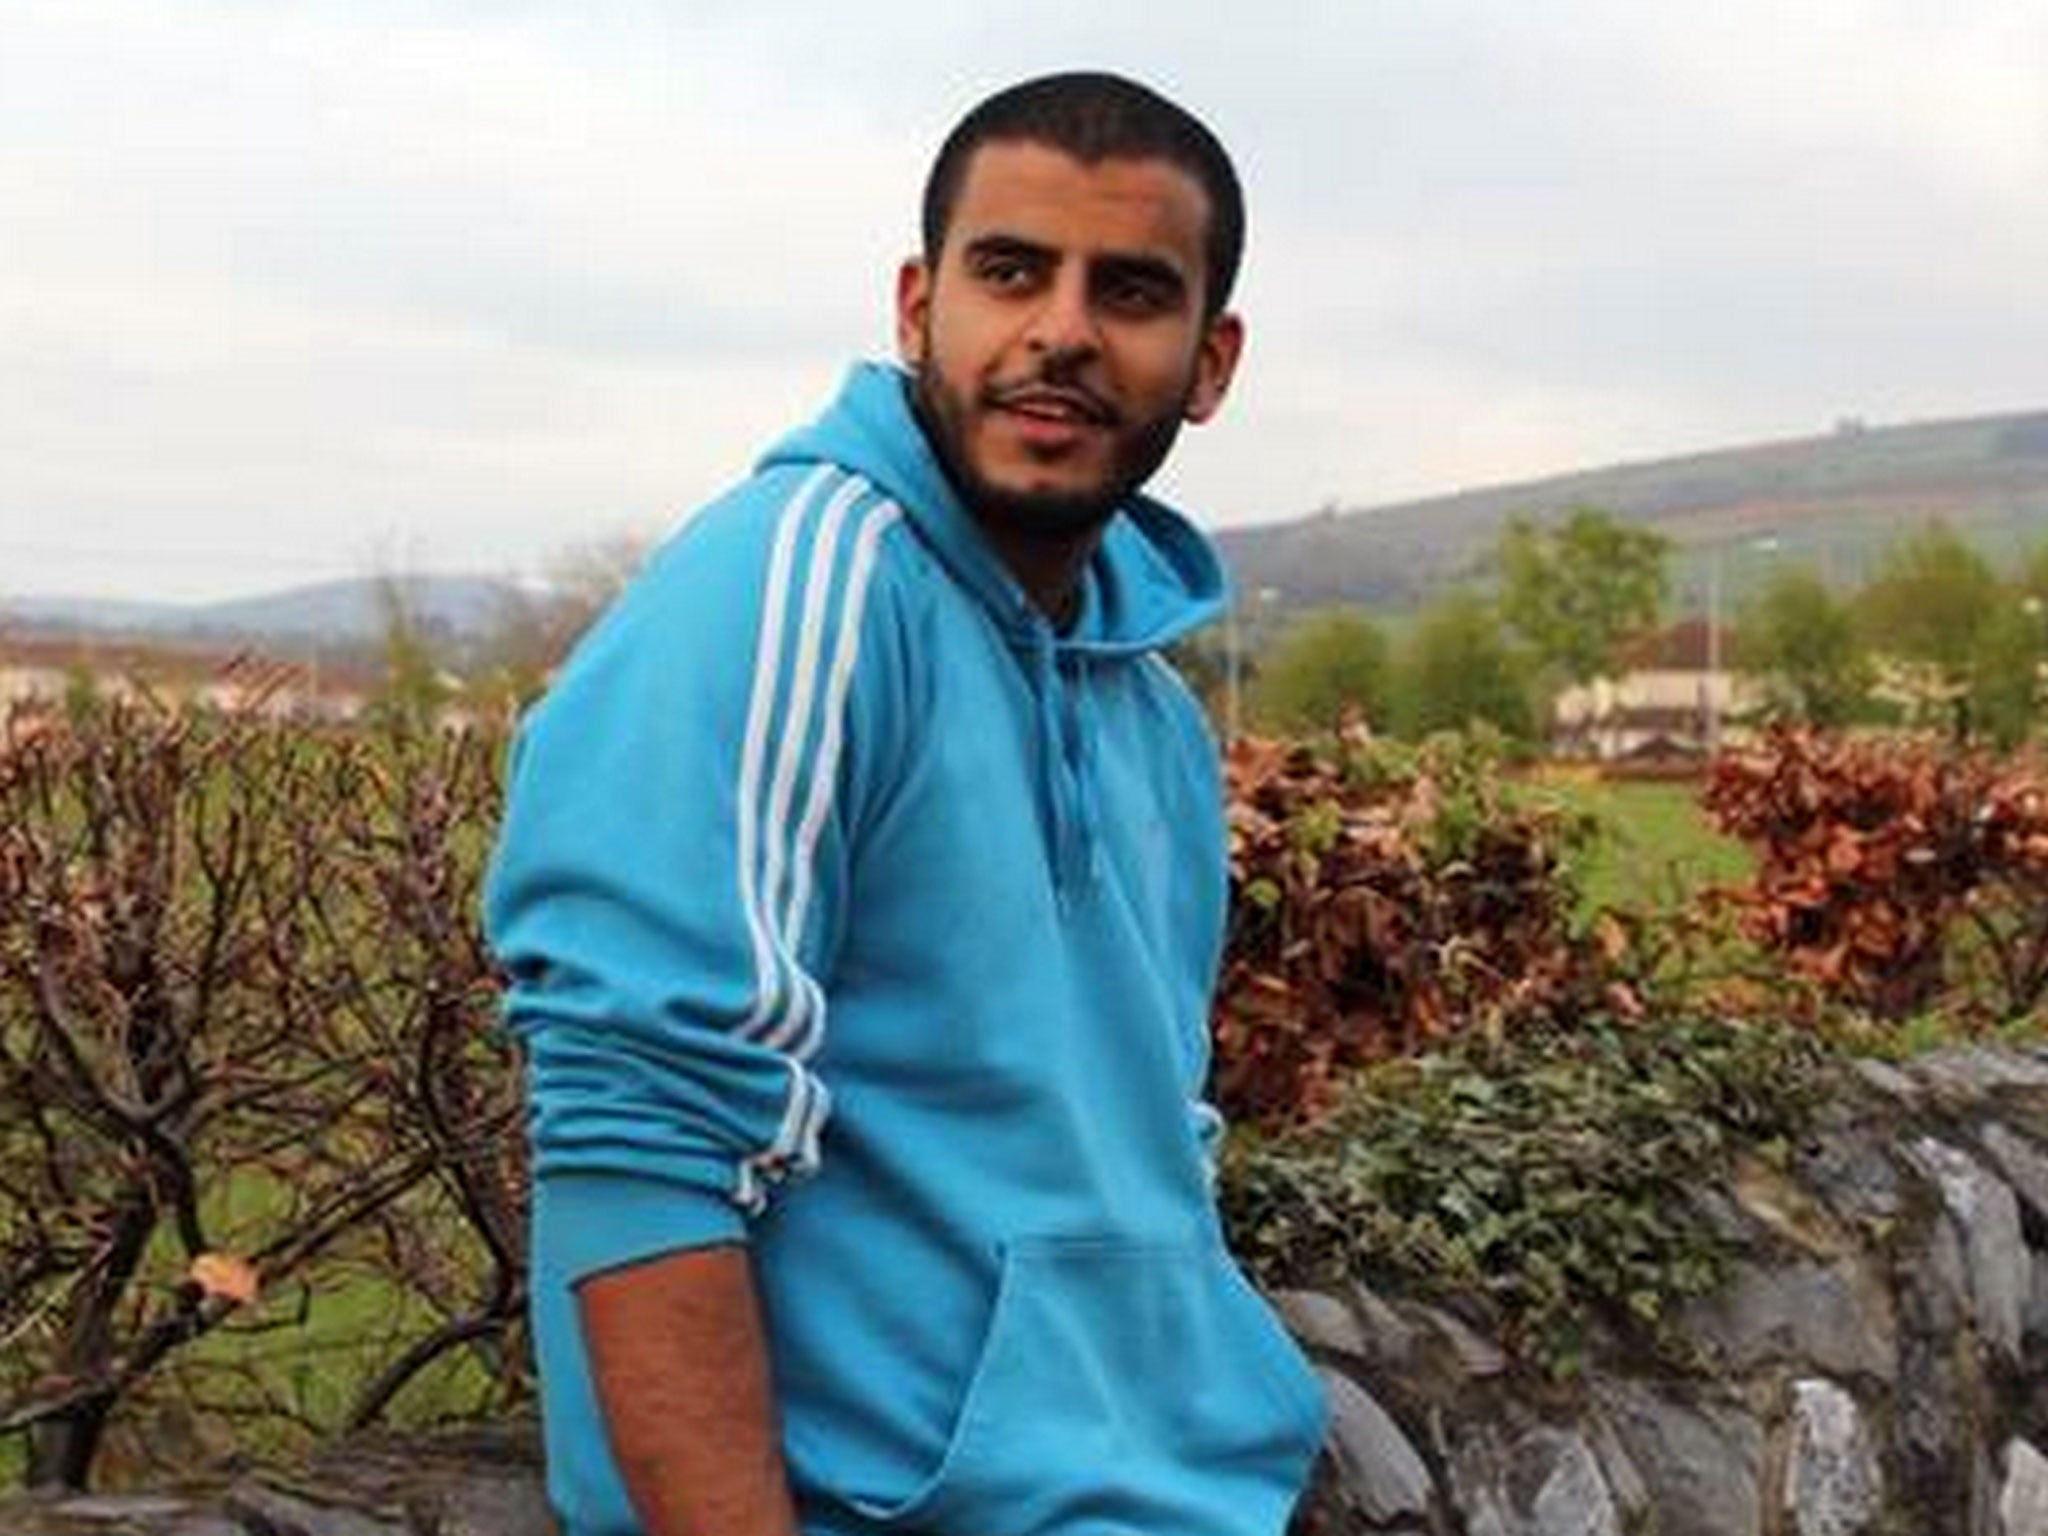 Ibrahim Halawa was arrested after attending a pro-democracy protest in Cairo with his three older sisters in August 2013